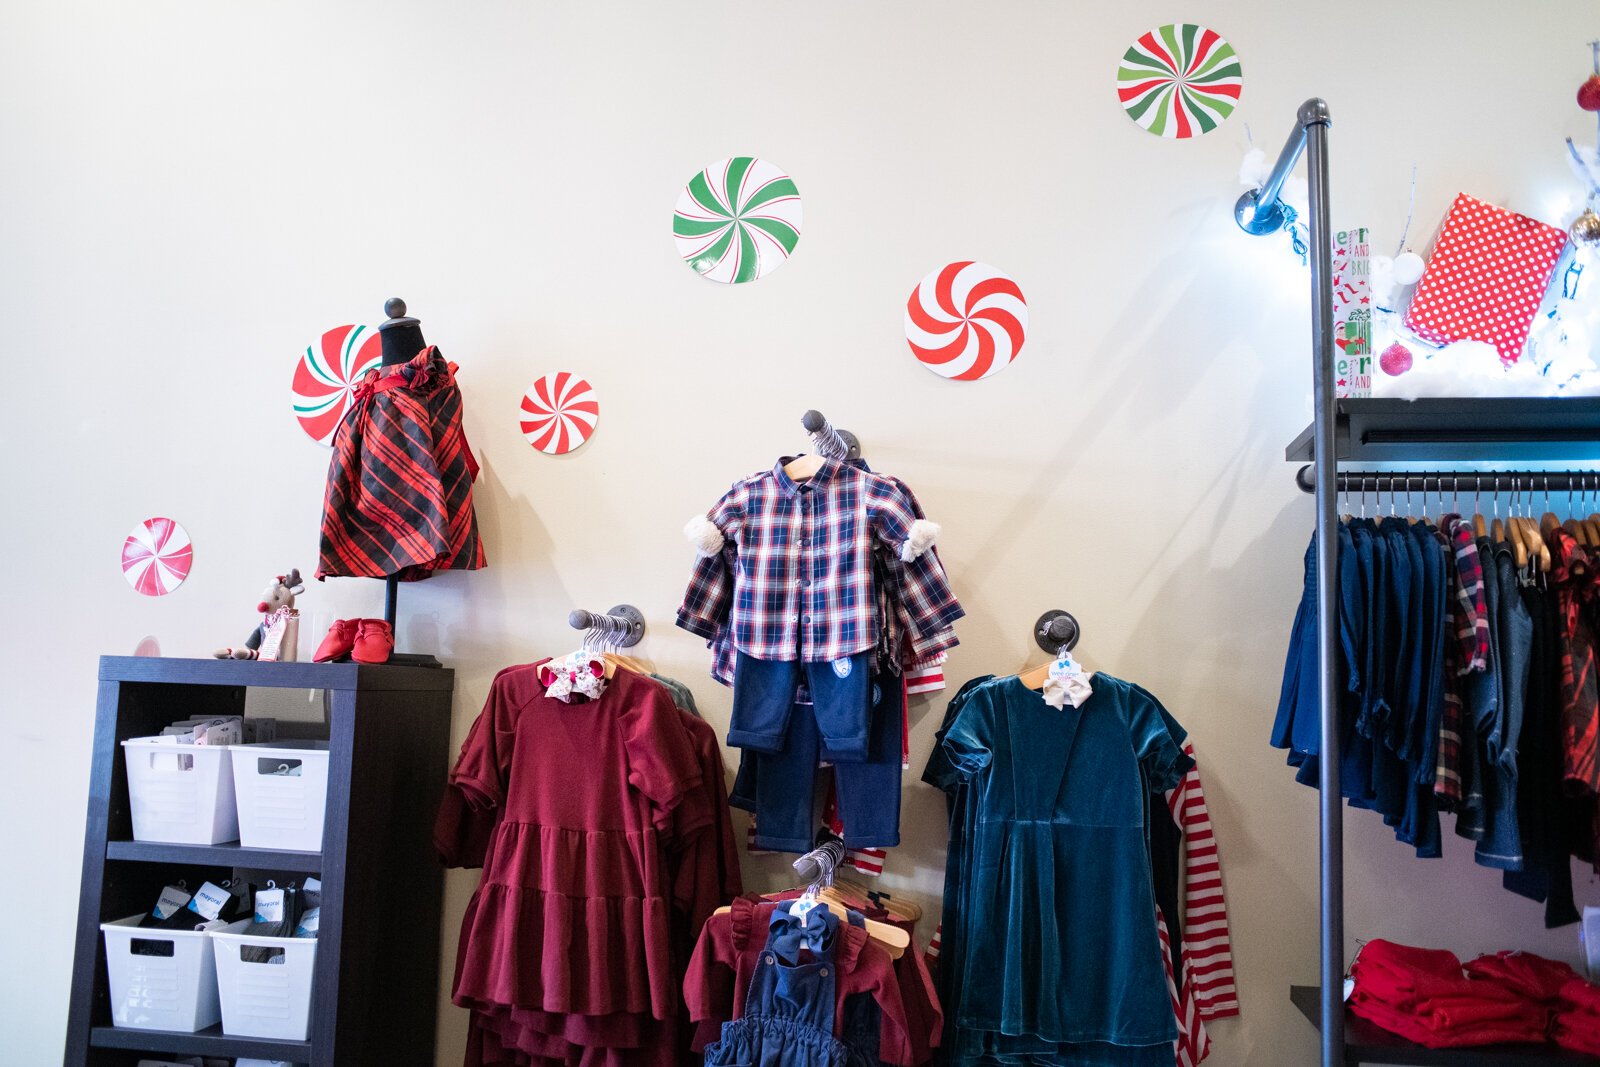 Clothing on display at Tiny Threads.